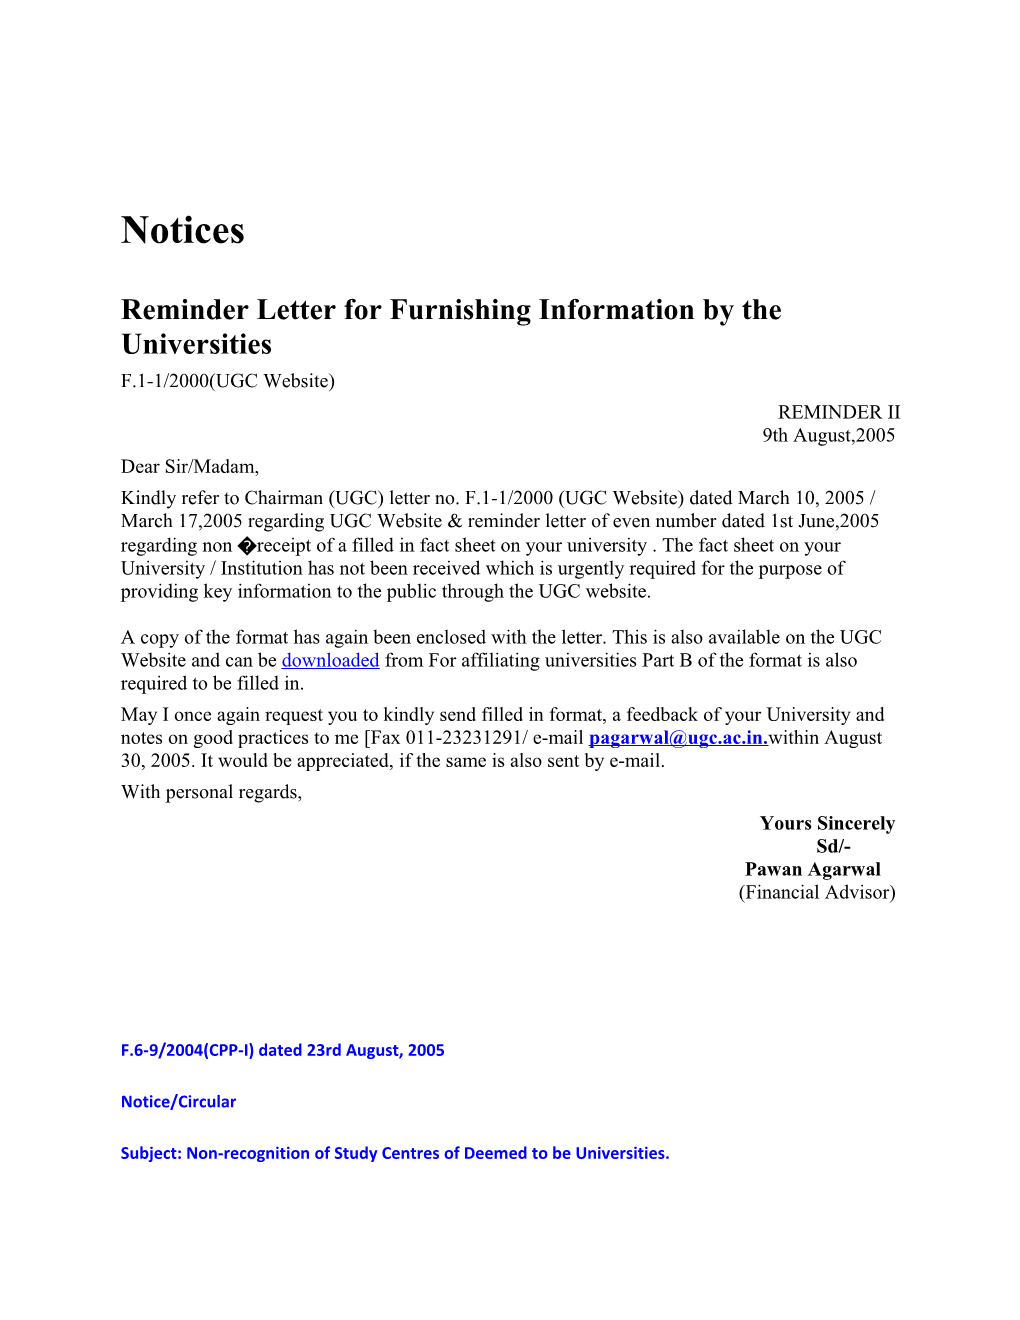 Reminder Letter for Furnishing Information by the Universities